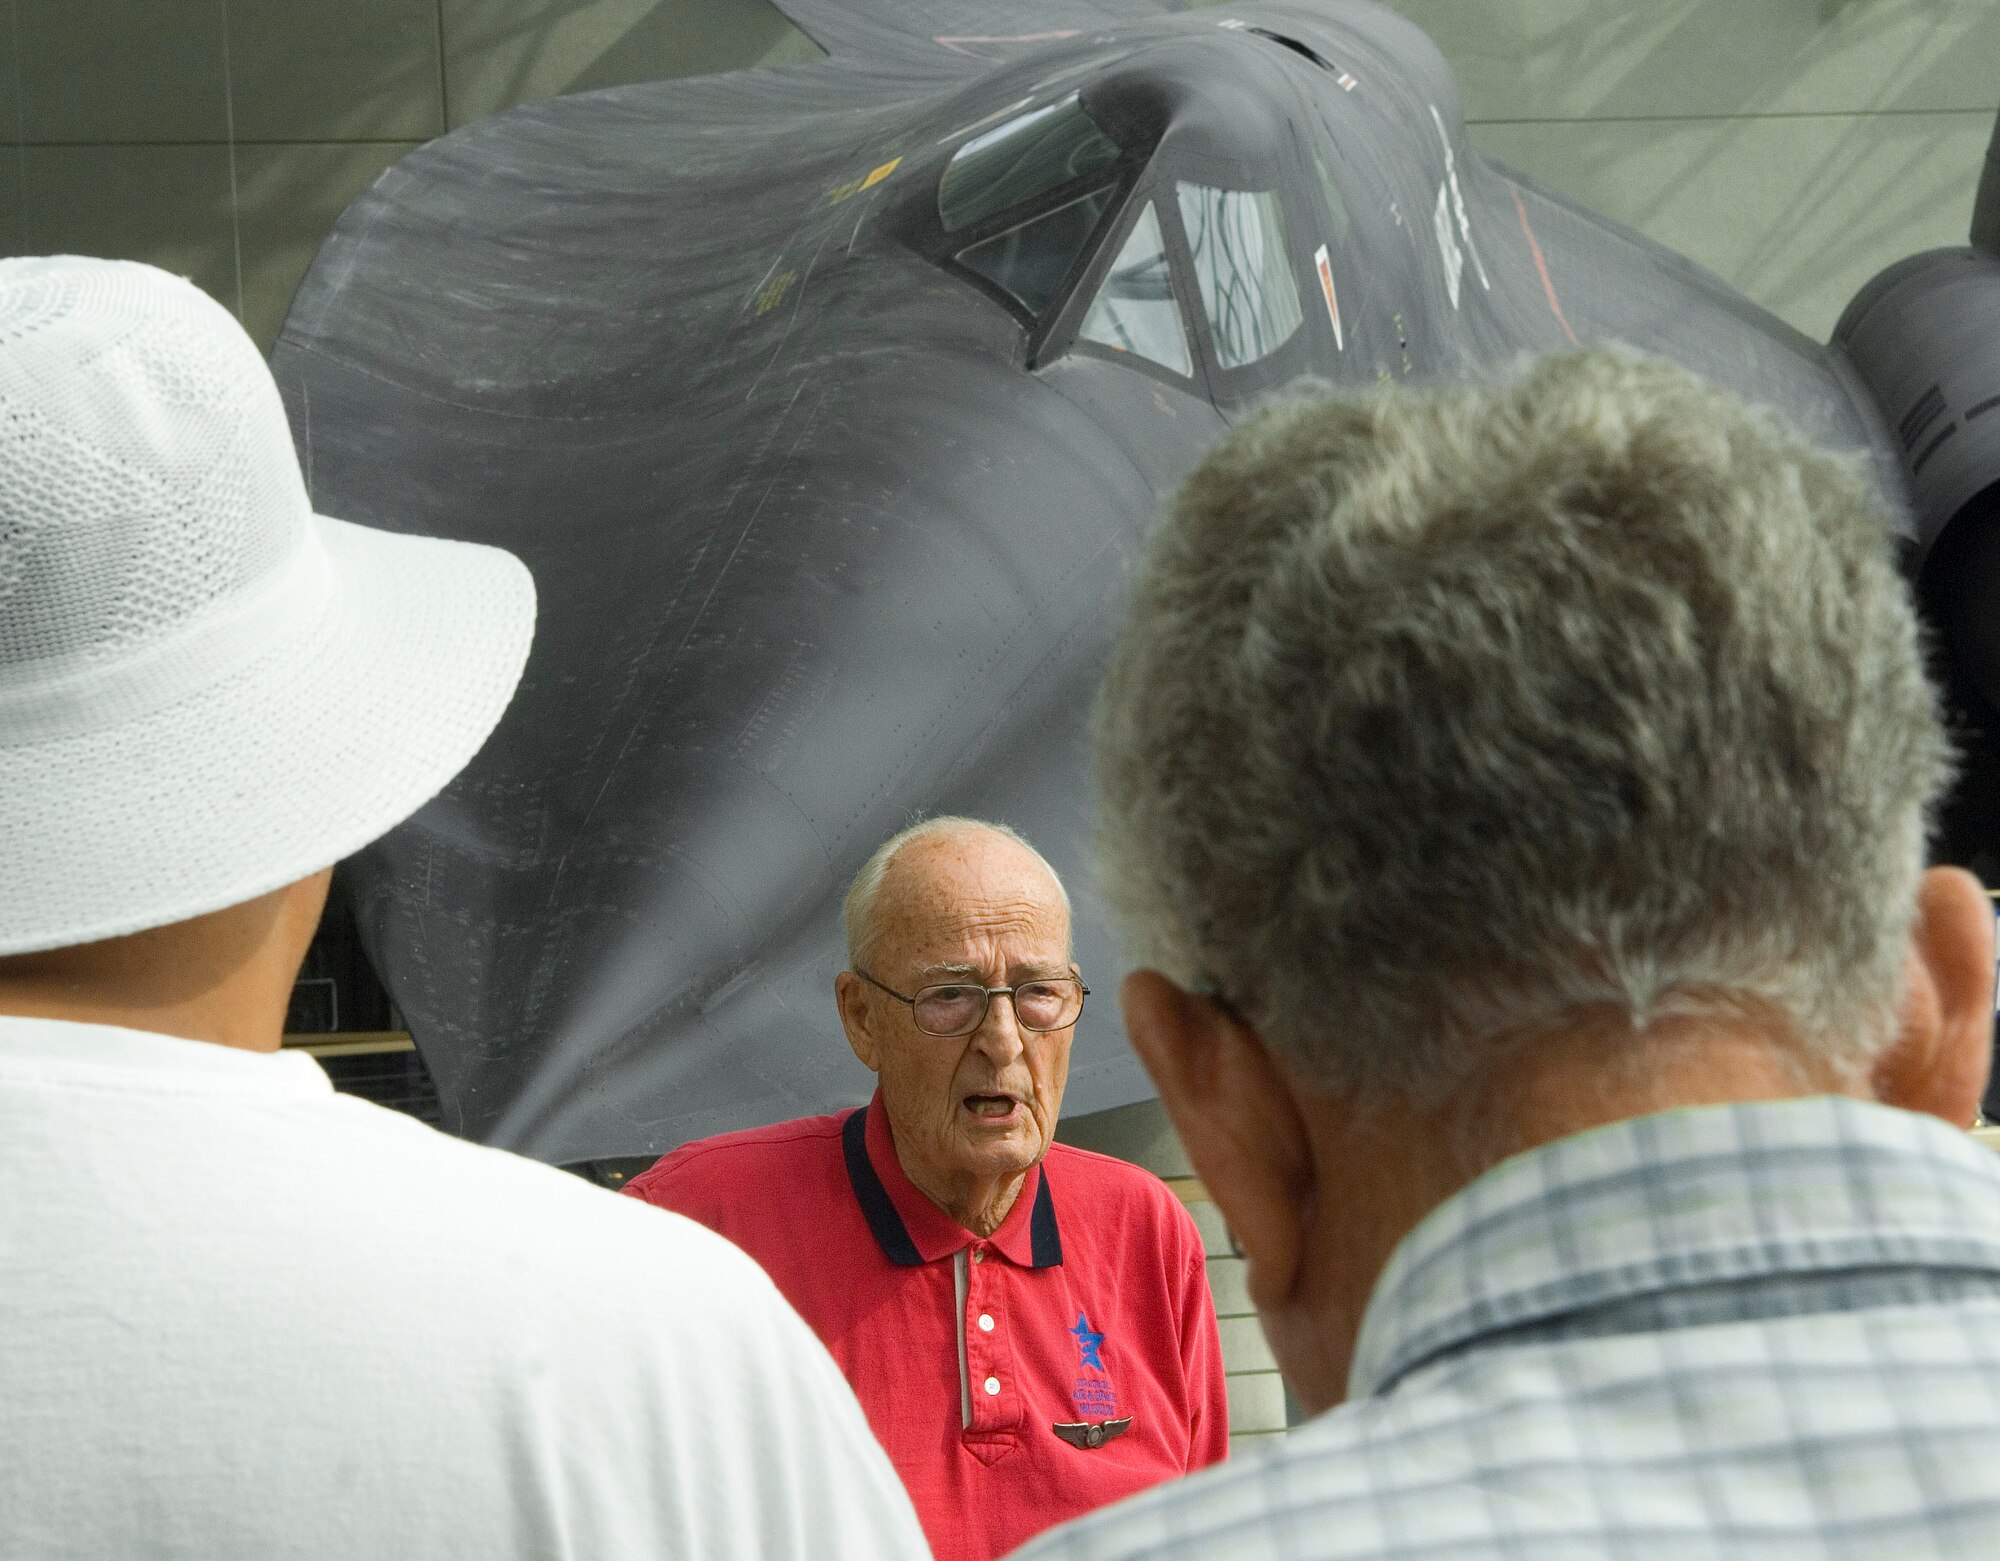 Retired Maj. Roger Ihle conducts a tour of the Strategic Air and Space Museum during Air Force Week in the Heartland Aug. 13 in Ashland, Neb. Museum officials hosted a day dedicated to the legacy of airpower providing special Air Force demonstration teams and displays. (U.S. Air Force photo/Staff Sgt. Bennie J. Davis III)